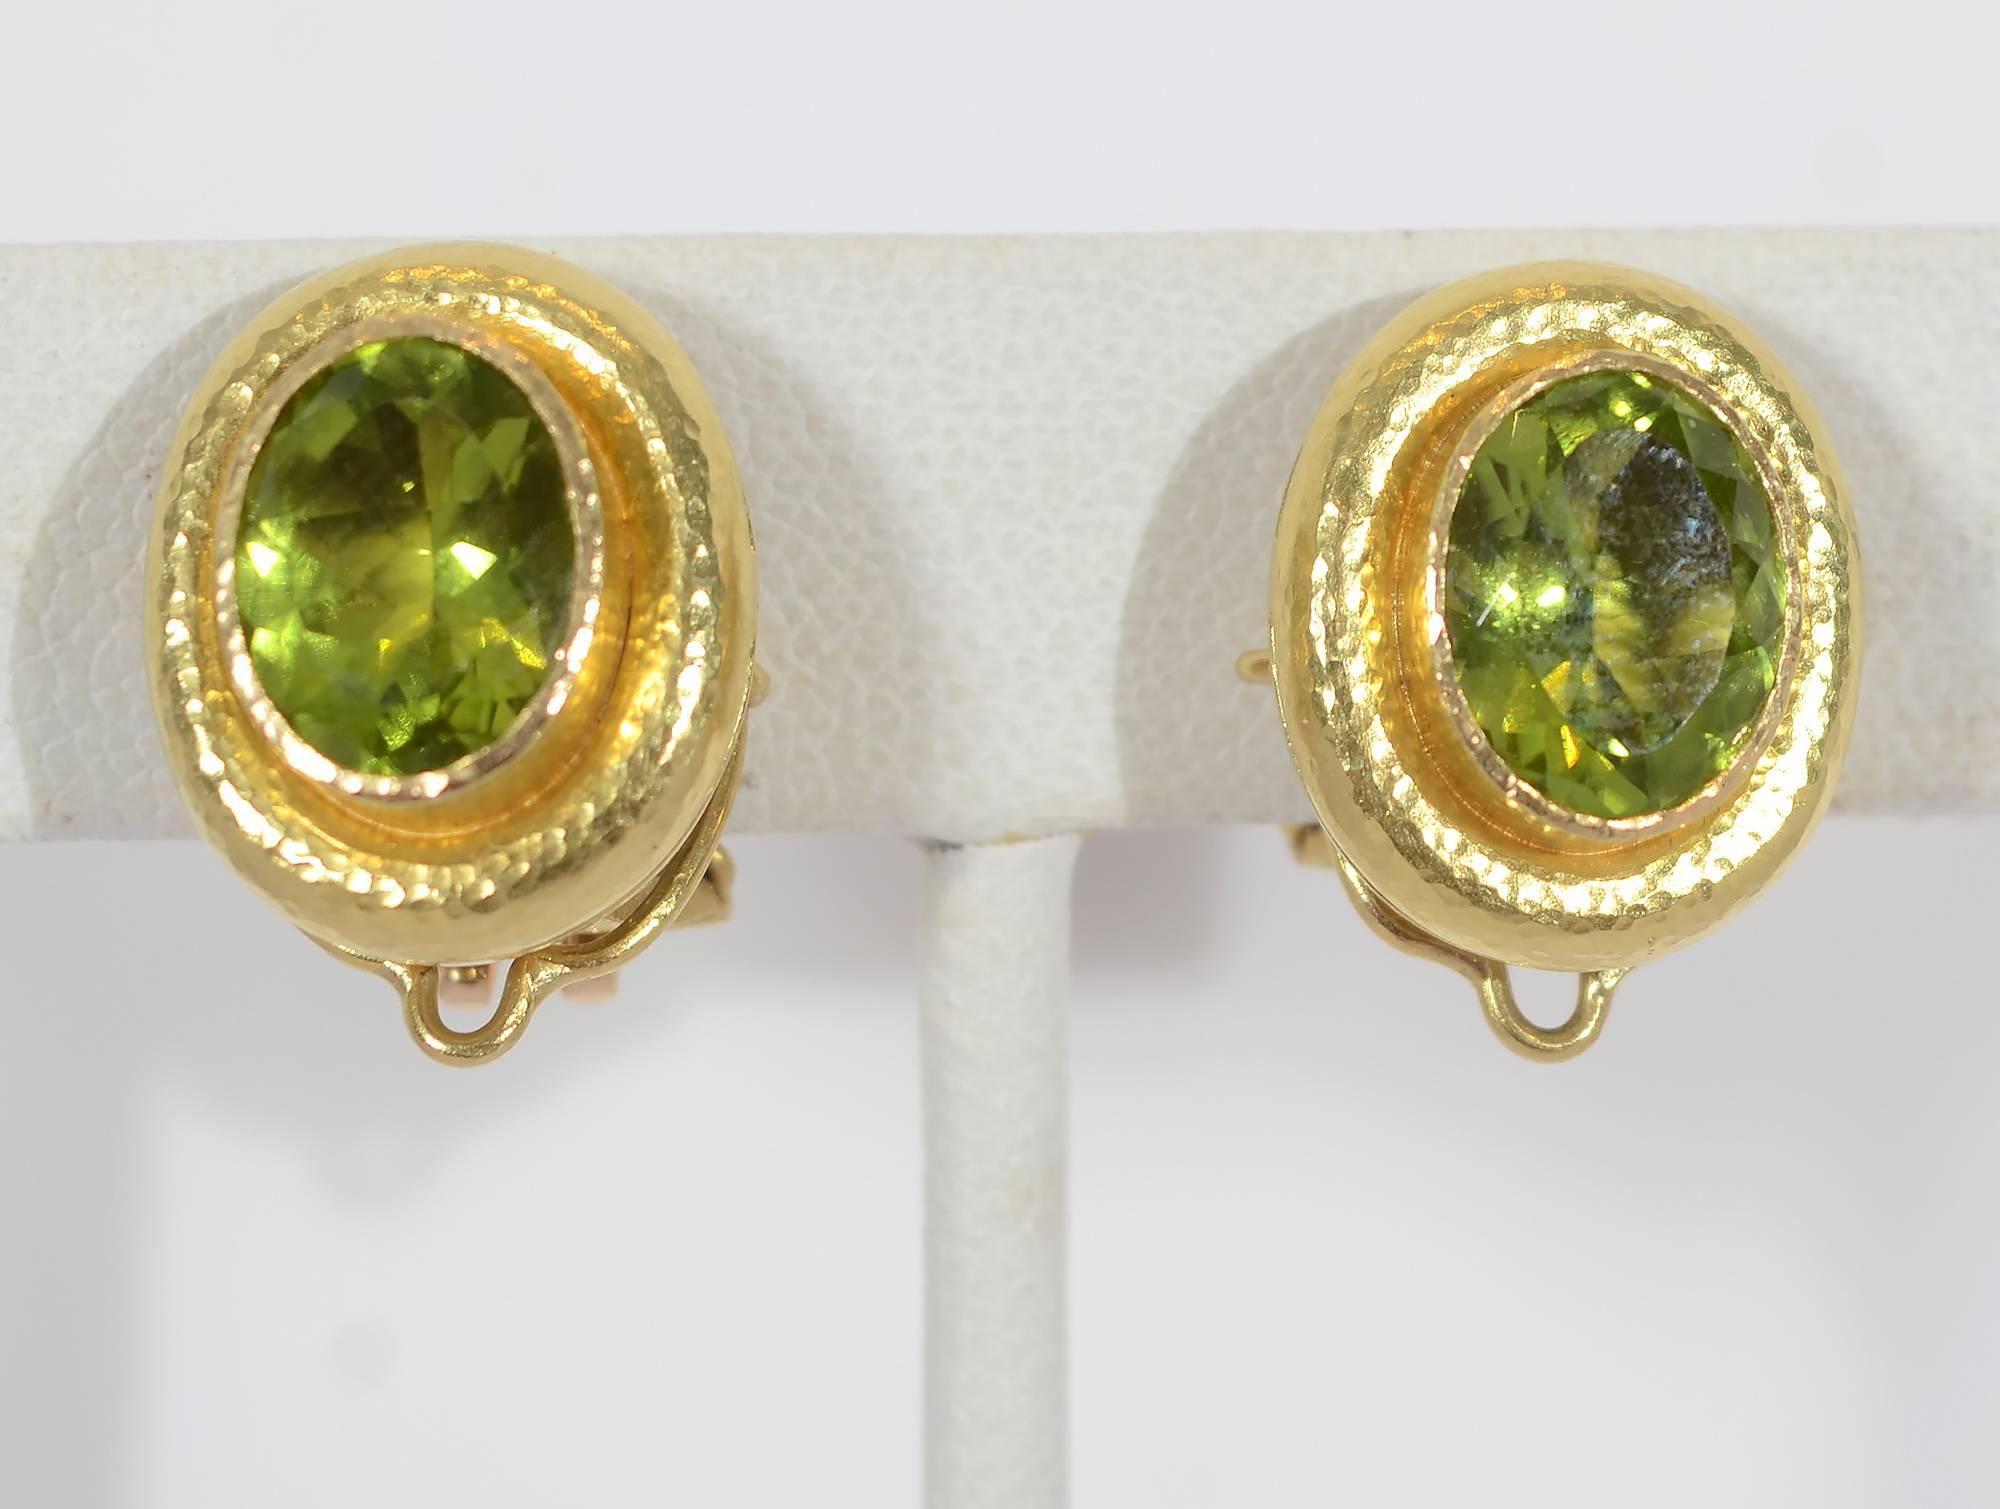 Elizabeth Locke versatile faceted peridot  earrings with a removable drop pendant. The earrings are shown both as oval discs measuring 5/8 " in length and with the pear shaped drop making a total length of 1 5/16".Backs are clips with